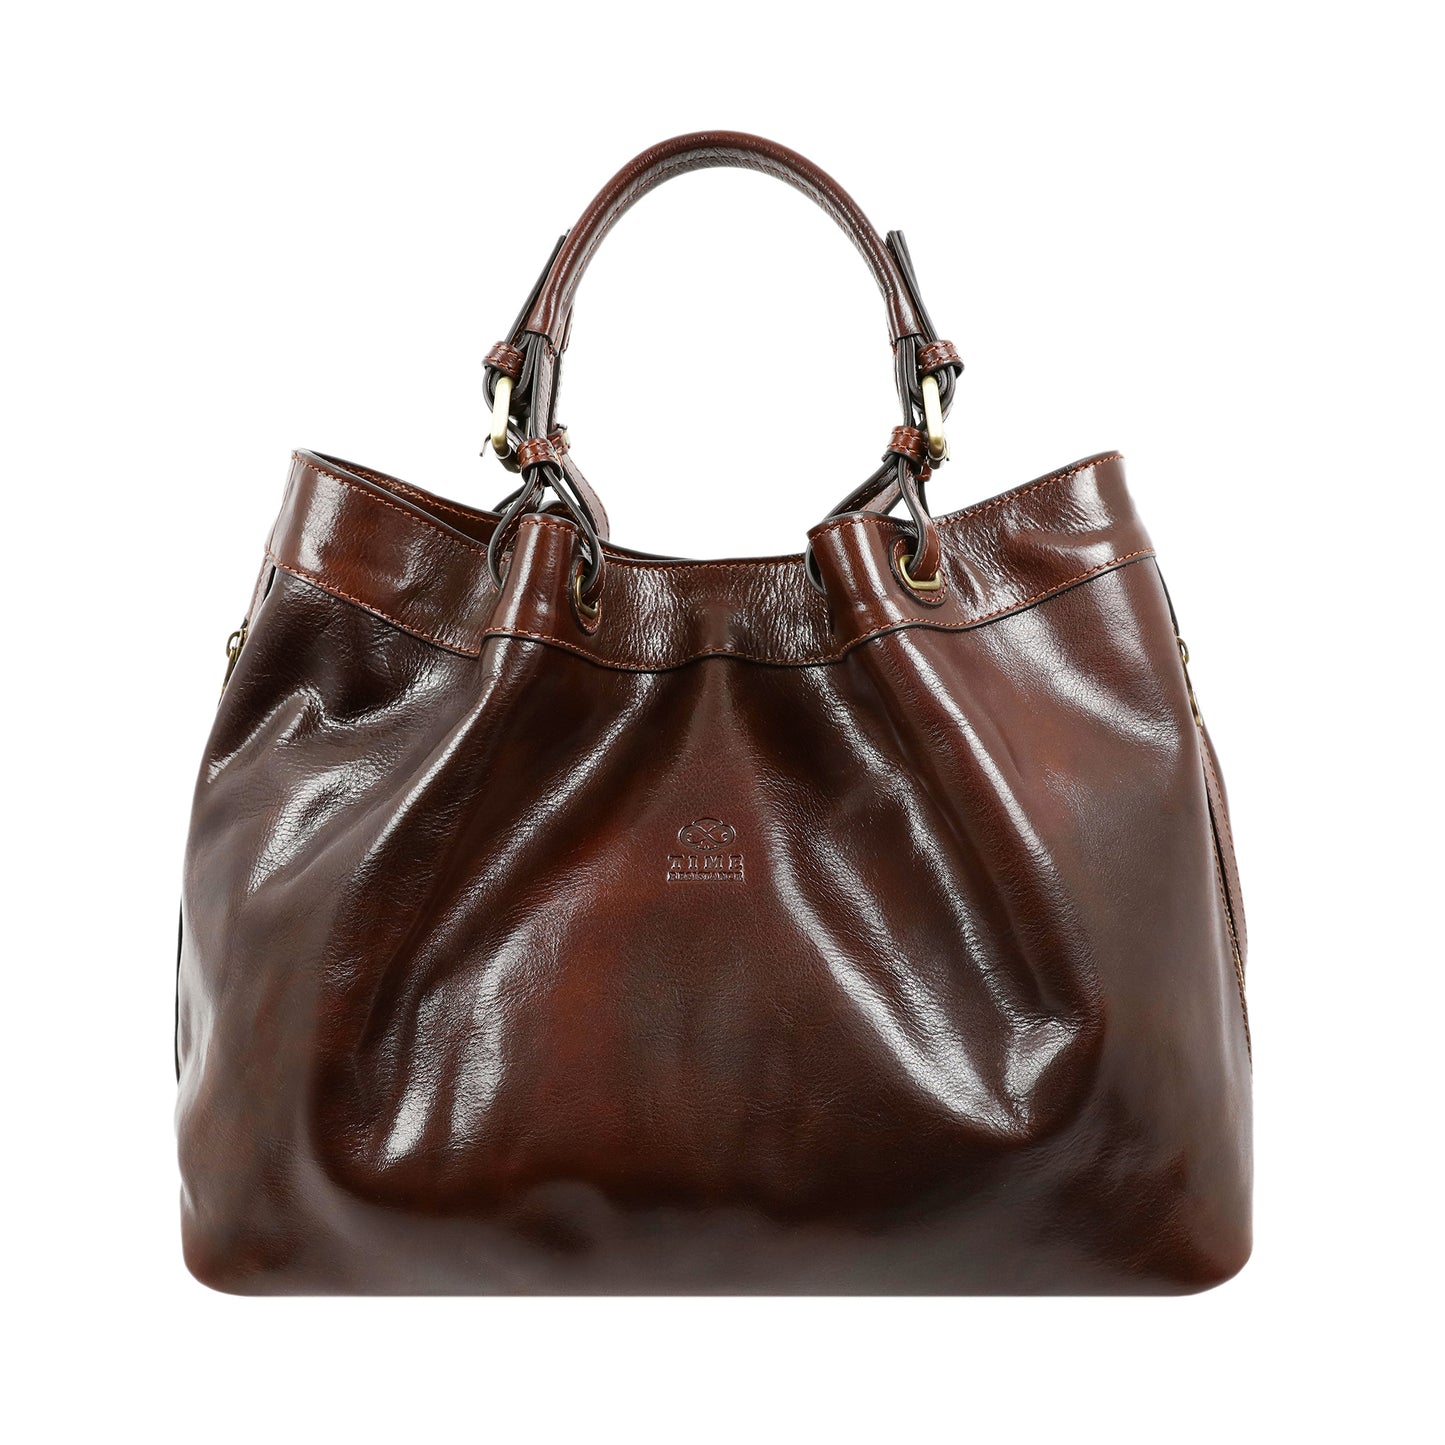 Leather Handbag - The Betrothed